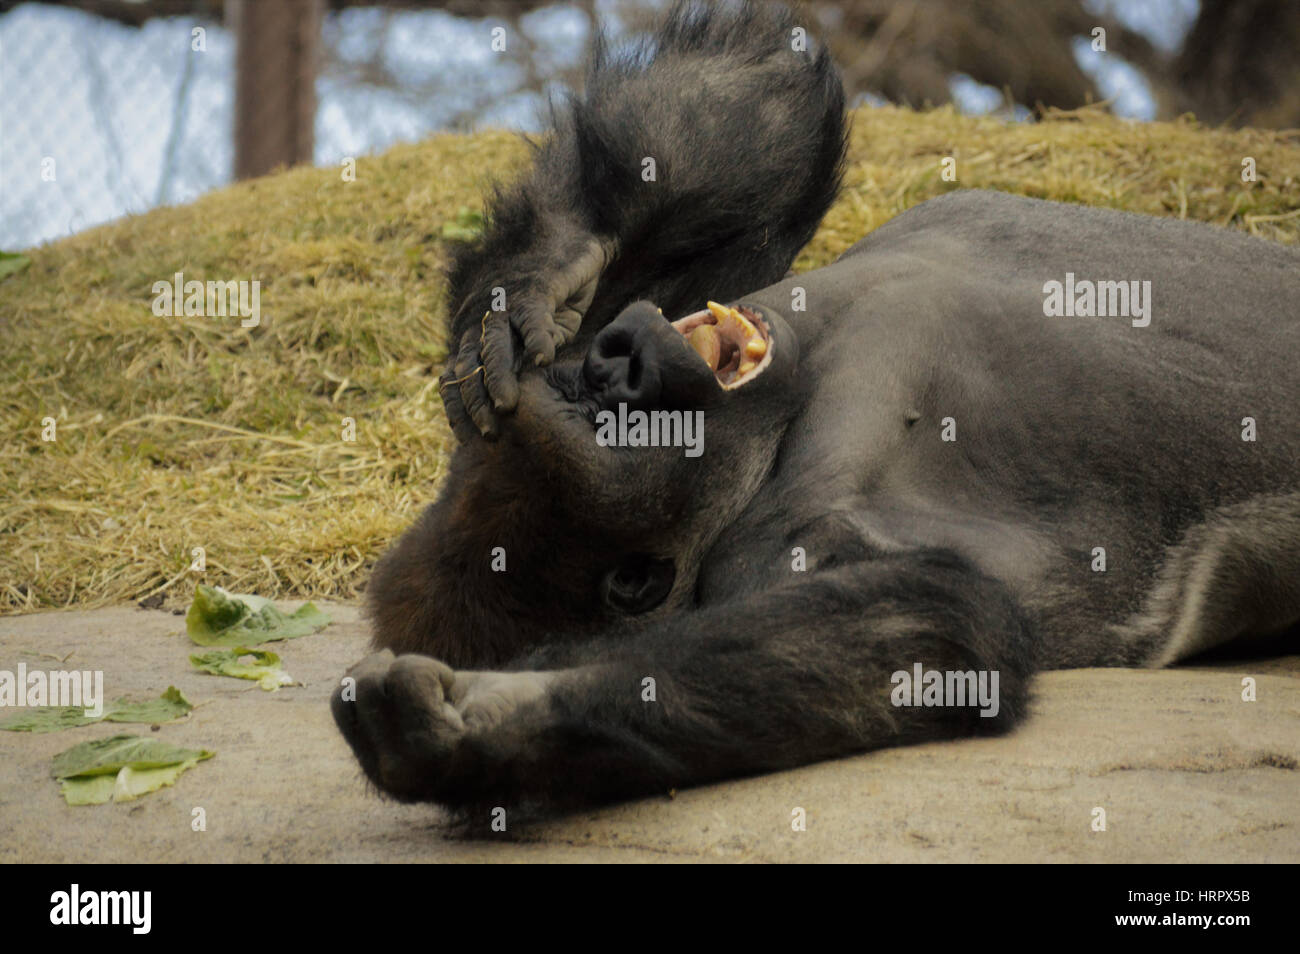 Gorilla laying down on a rock Stock Photo